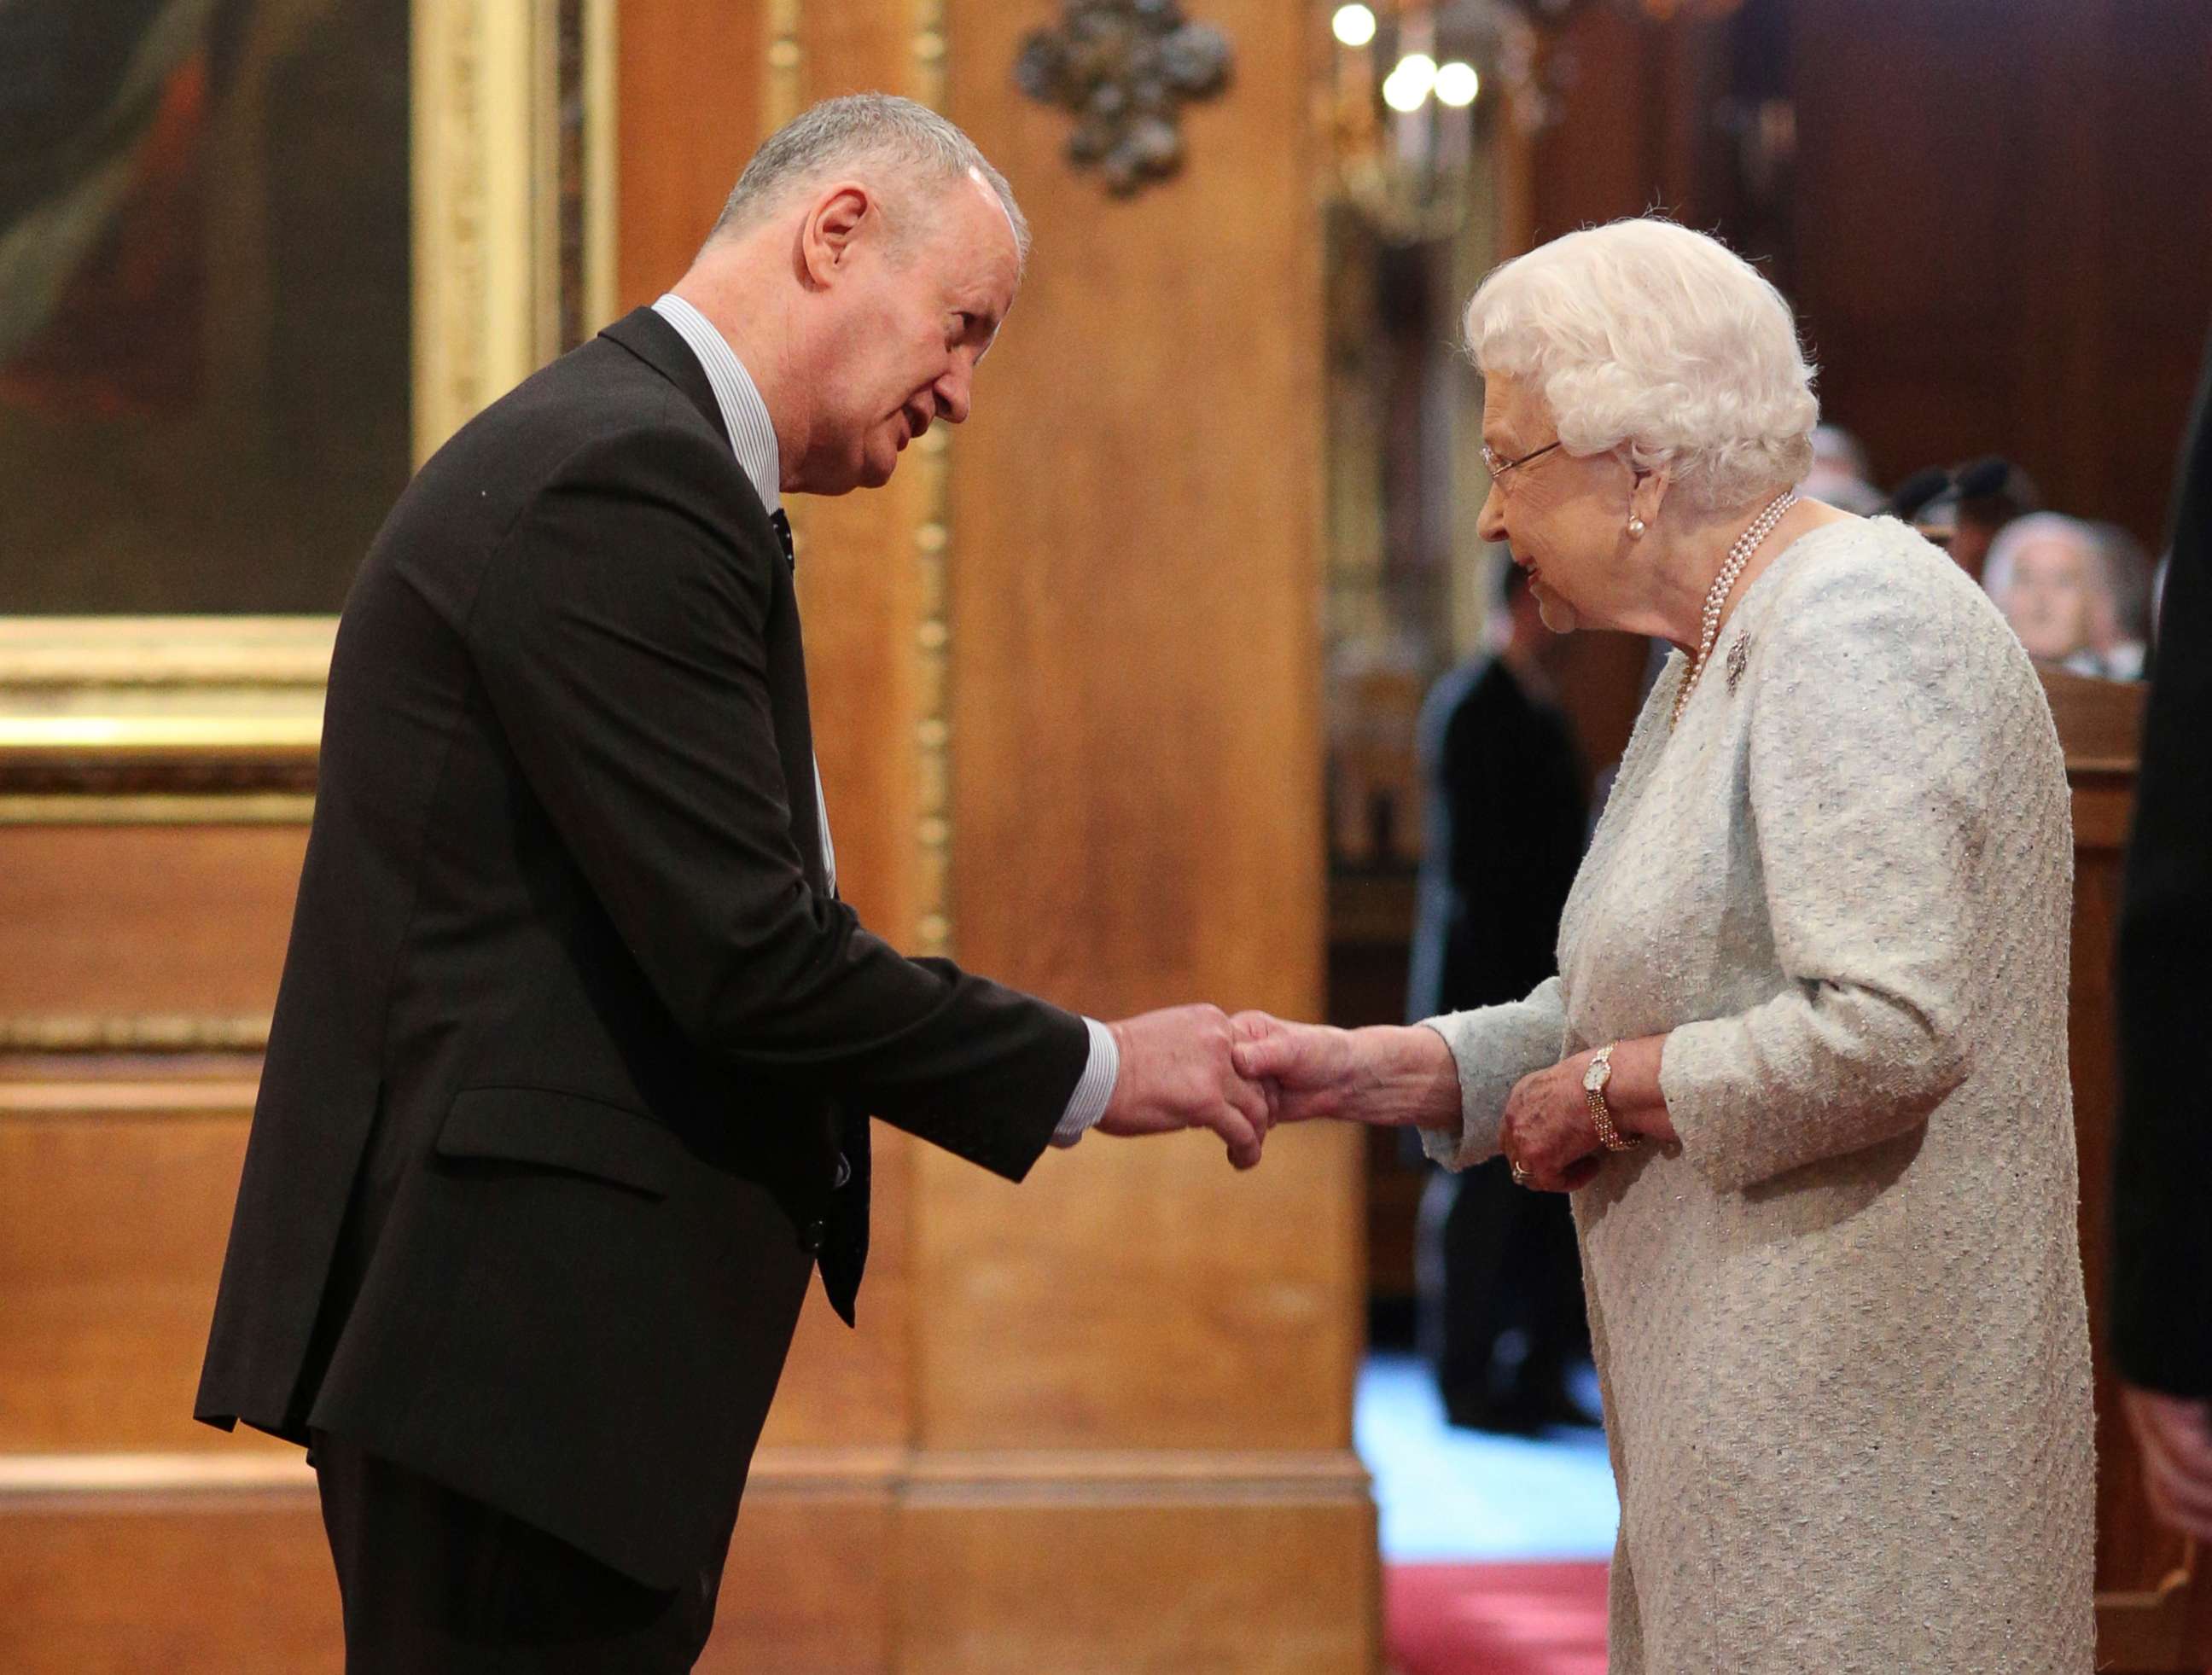 PHOTO: FILE PHOTO: Frank Mullane is made an MBE (Member of the Order of the British Empire) by Queen Elizabeth II for services to families affected by domestic homicide at Windsor Castle, in Windsor, U.K., March 22, 2019.